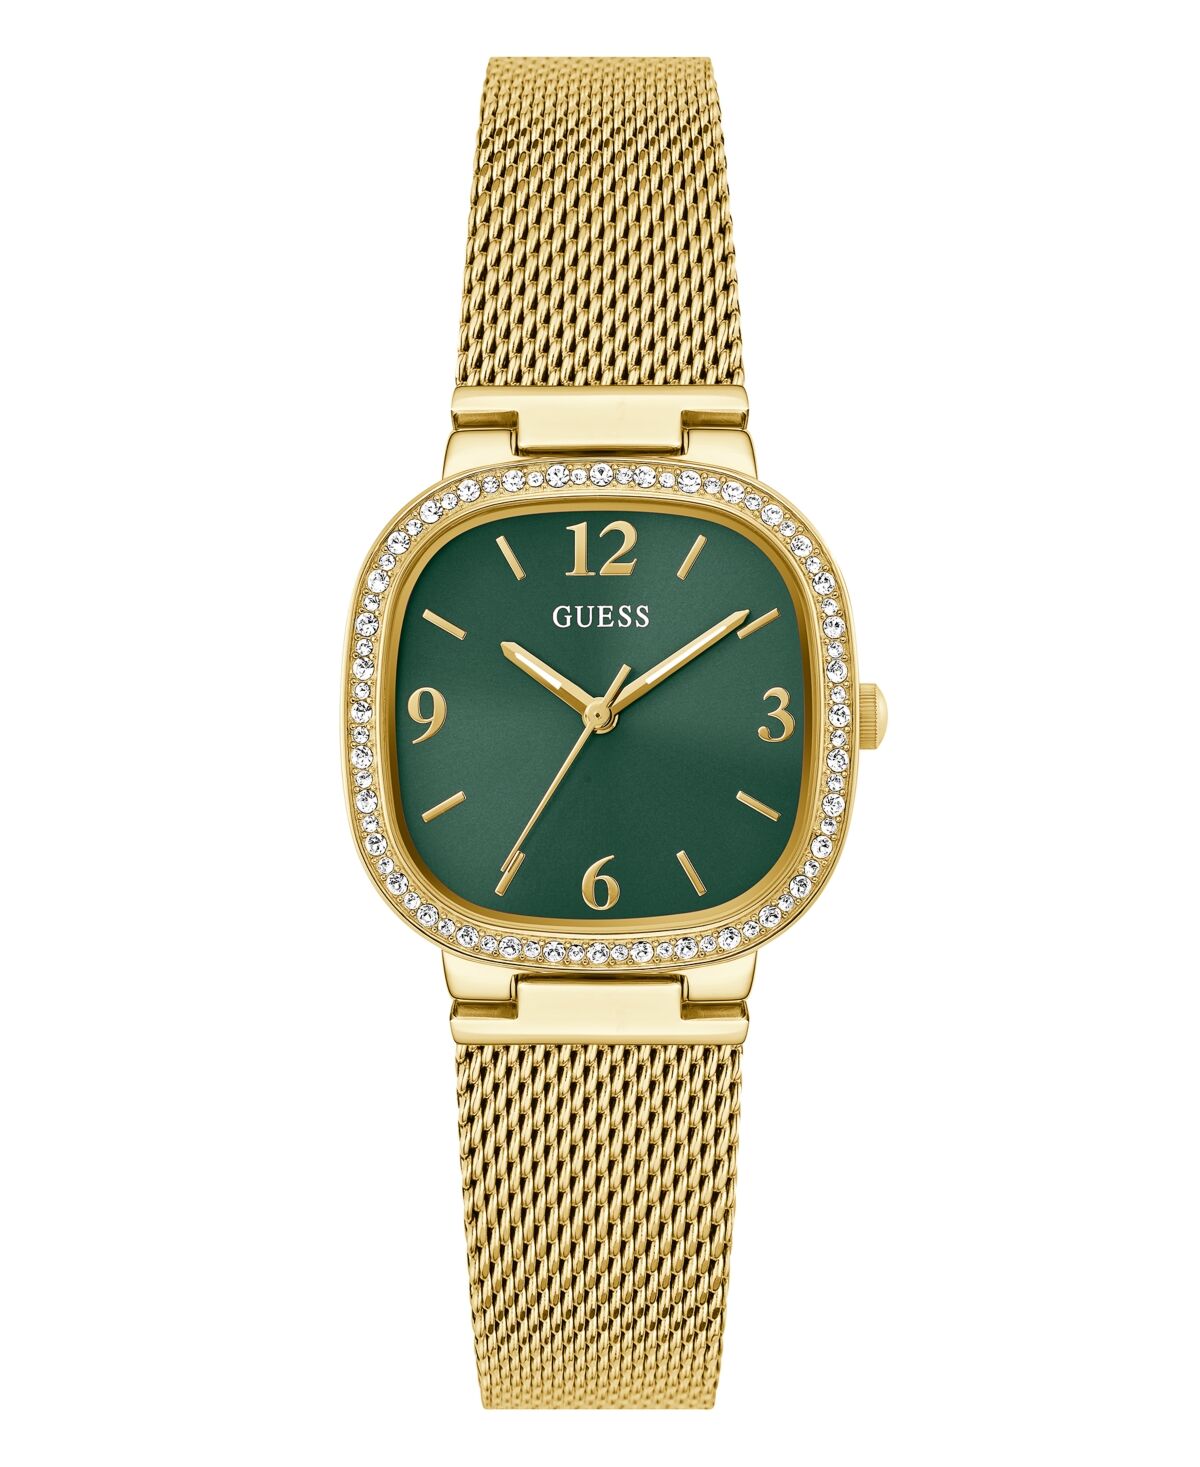 Guess Women's Analog Gold-Tone Stainless Steel and Mesh Watch 32mm - Gold-Tone